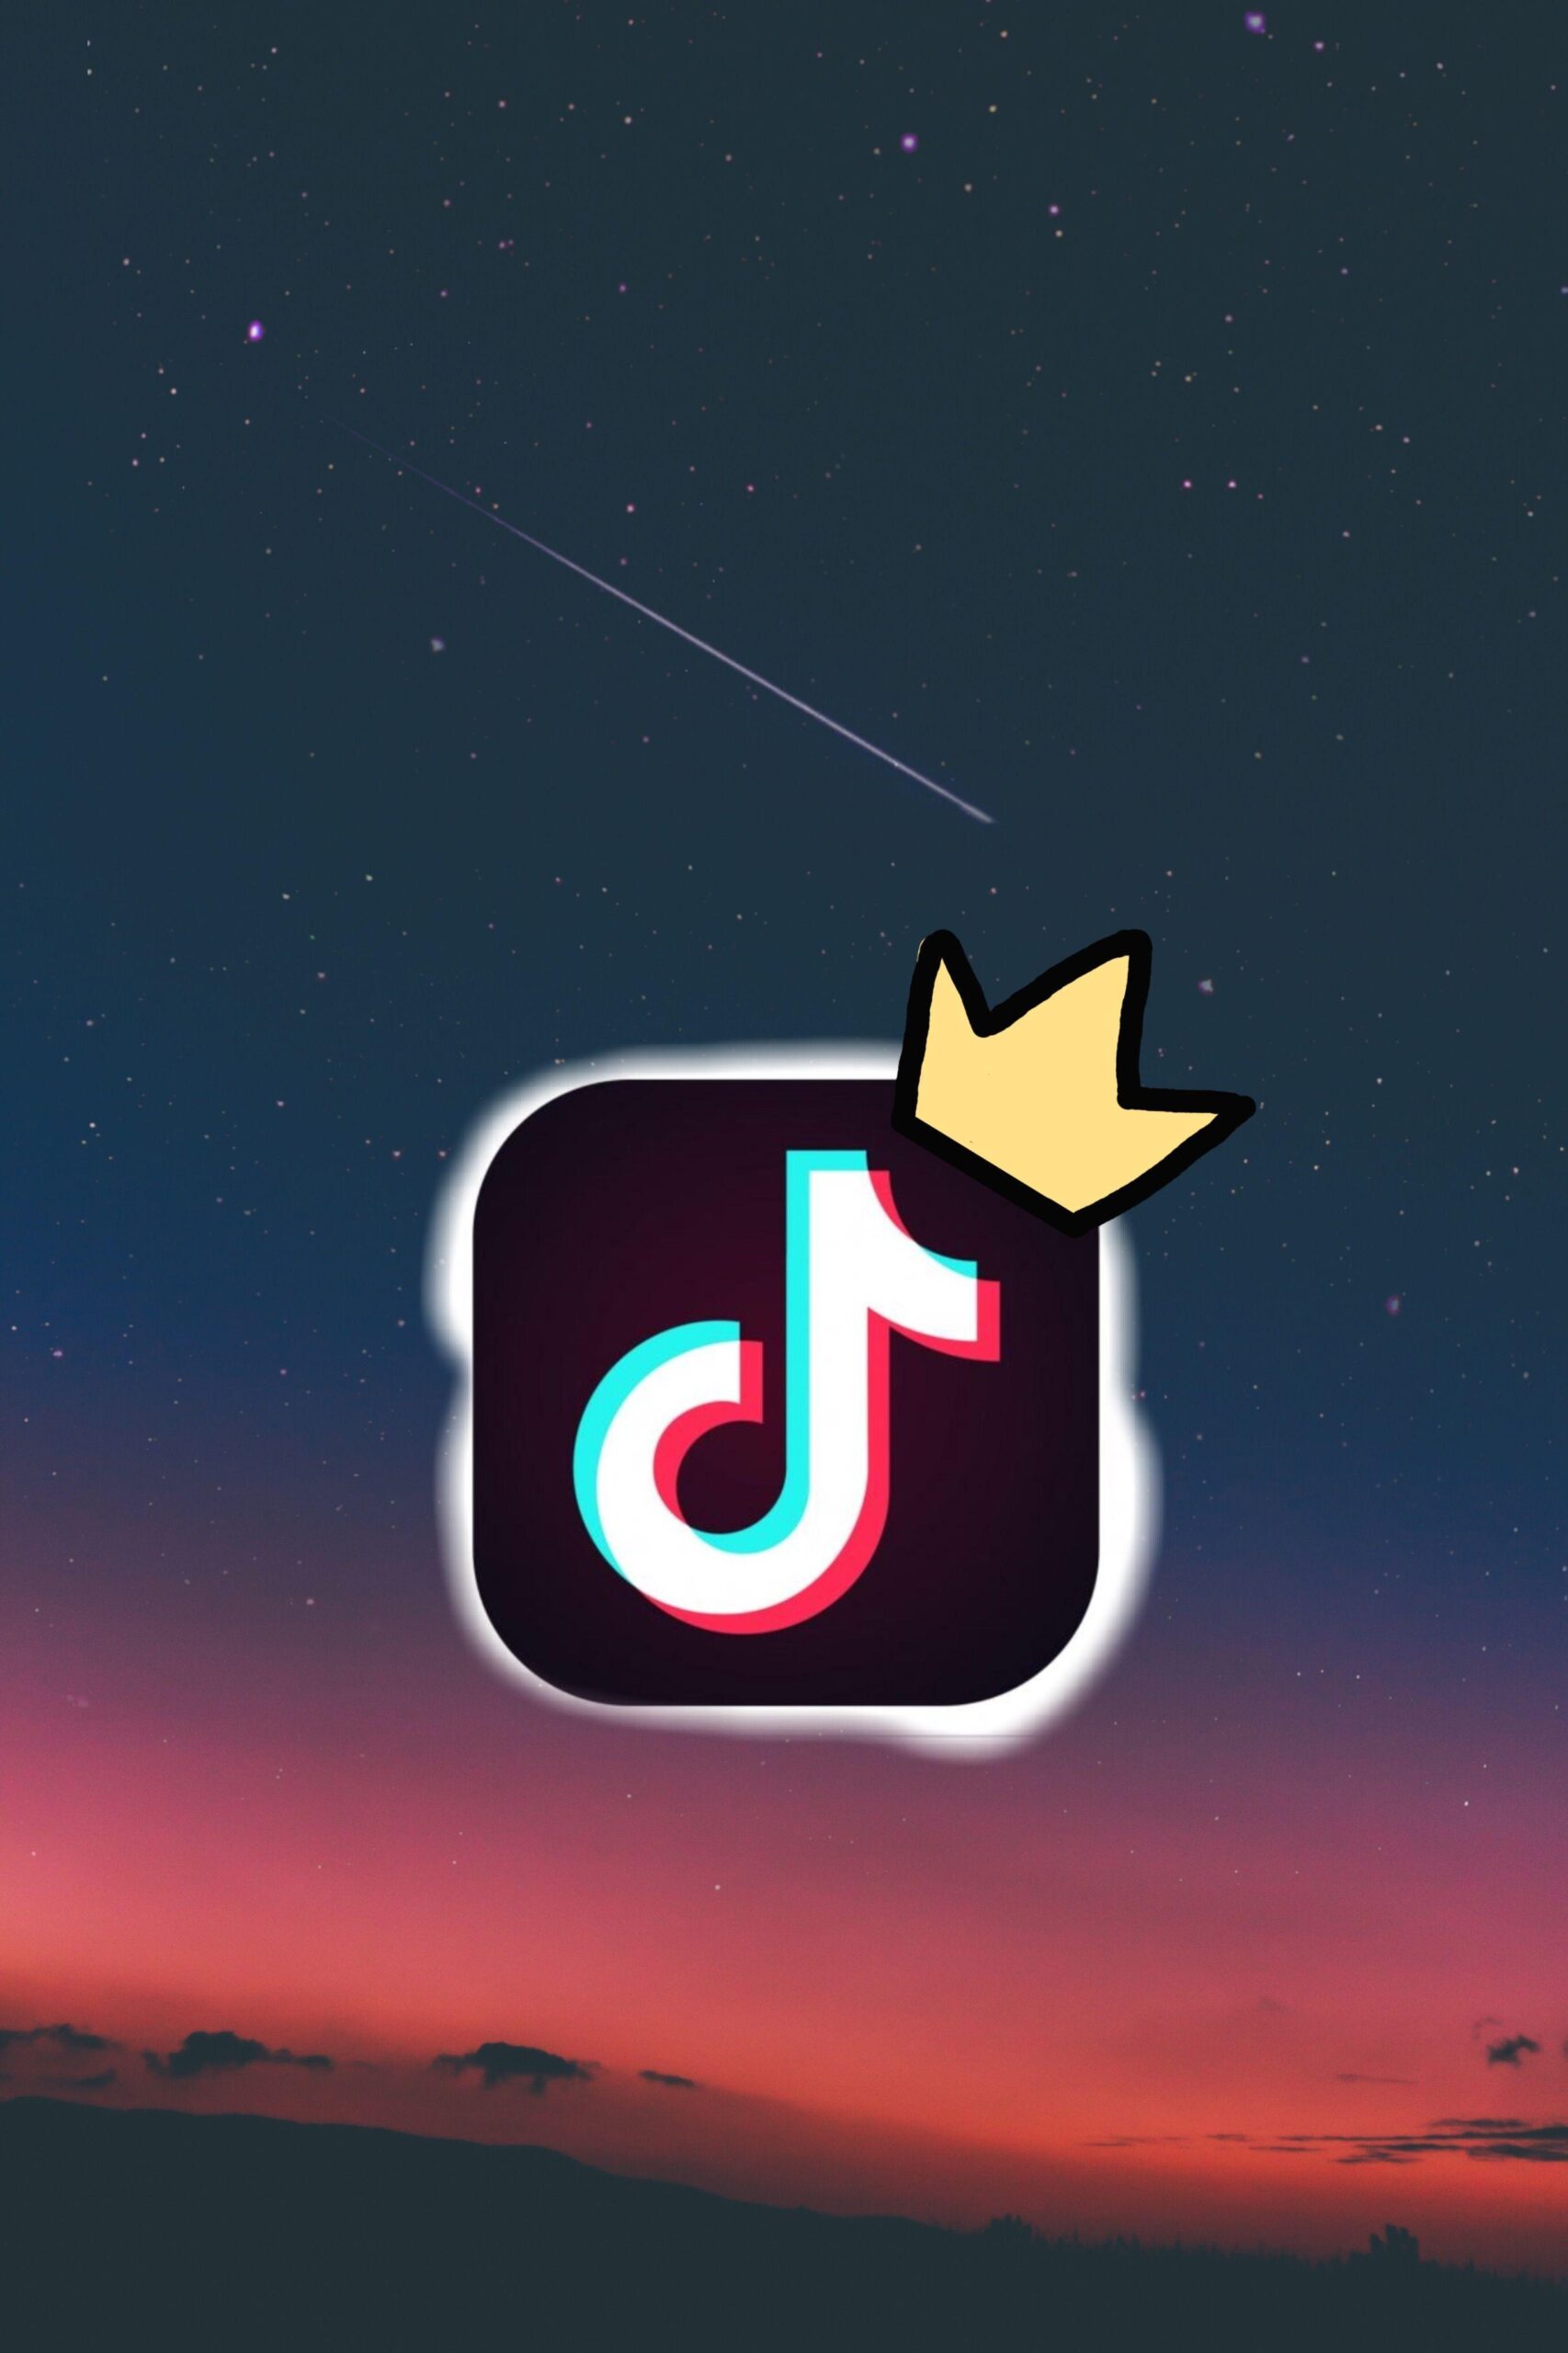 TikTok Hd Wallpapers For Pc